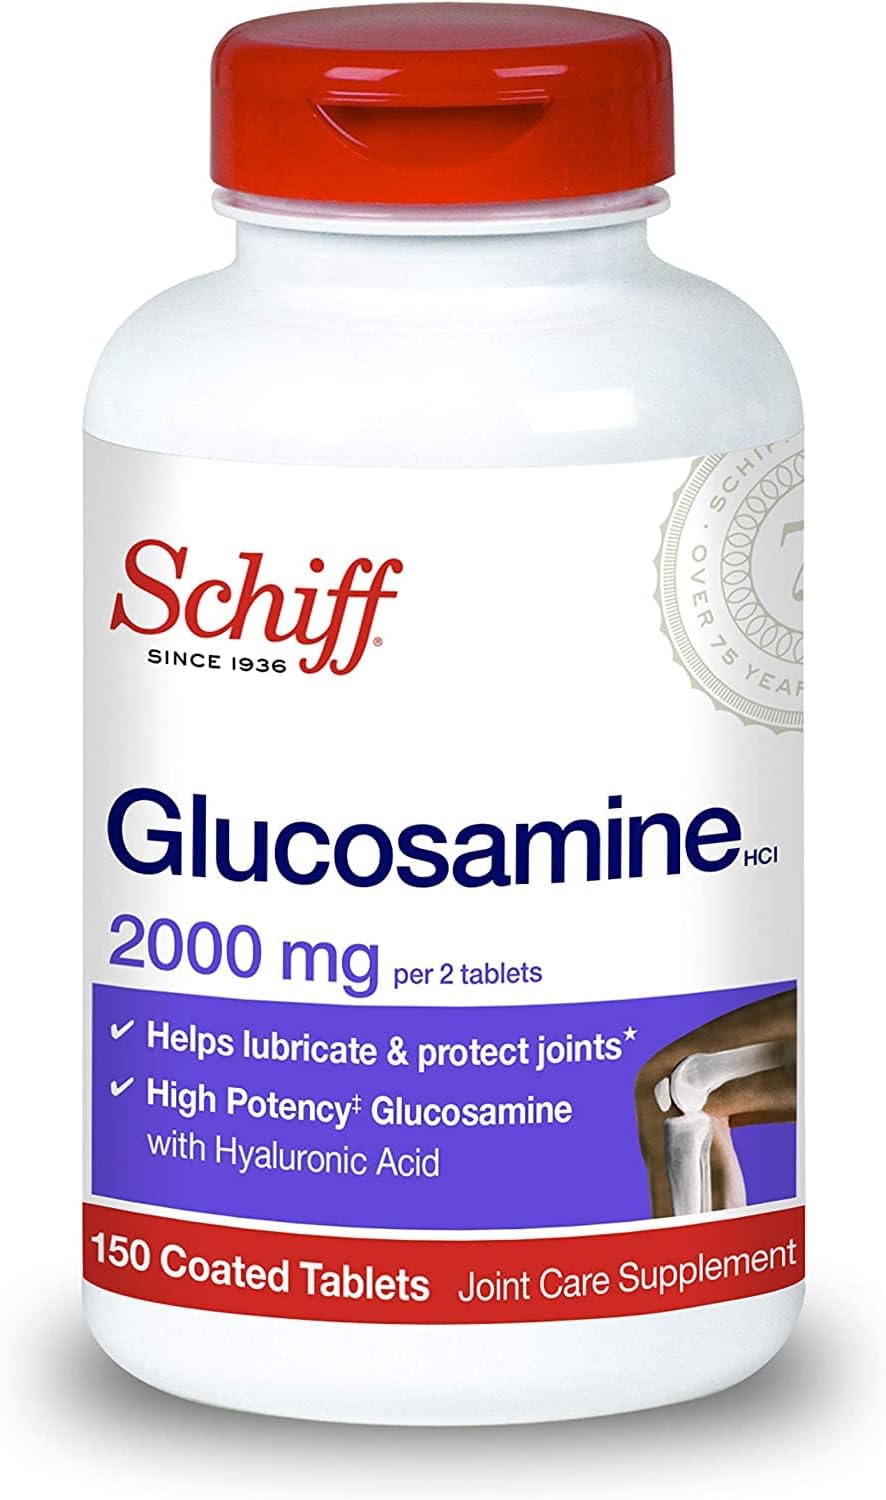 Schiff Glucosamine With Hyaluronic Acid, 2000mg Glucosamine, Joint Care Supplement Helps Lubricate & Protect Joints*, 150 Count (Pack of 2)